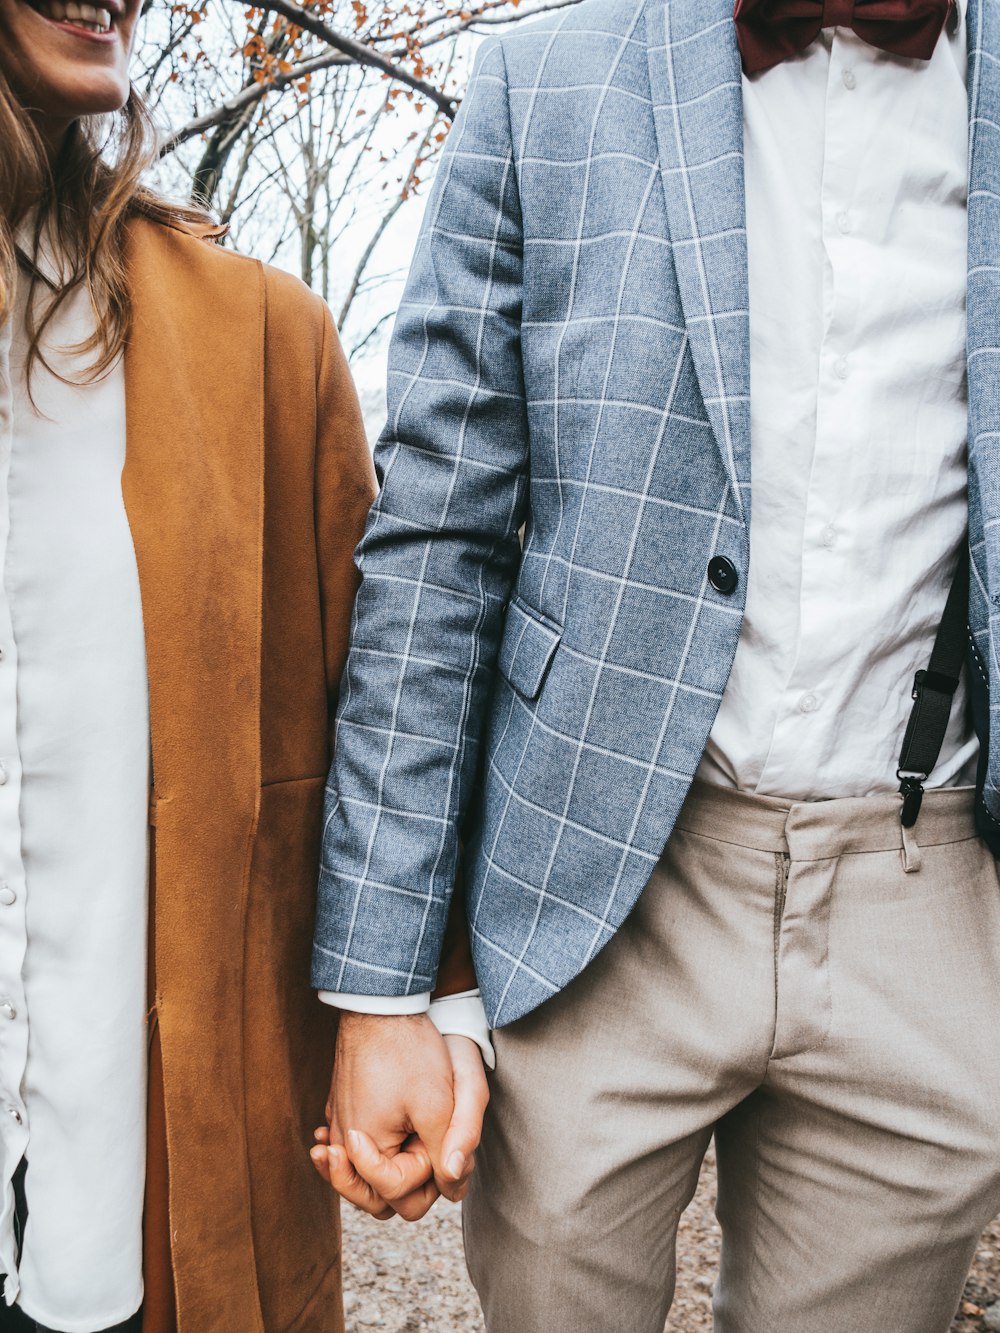 man in gray suit jacket and woman in white dress shirt